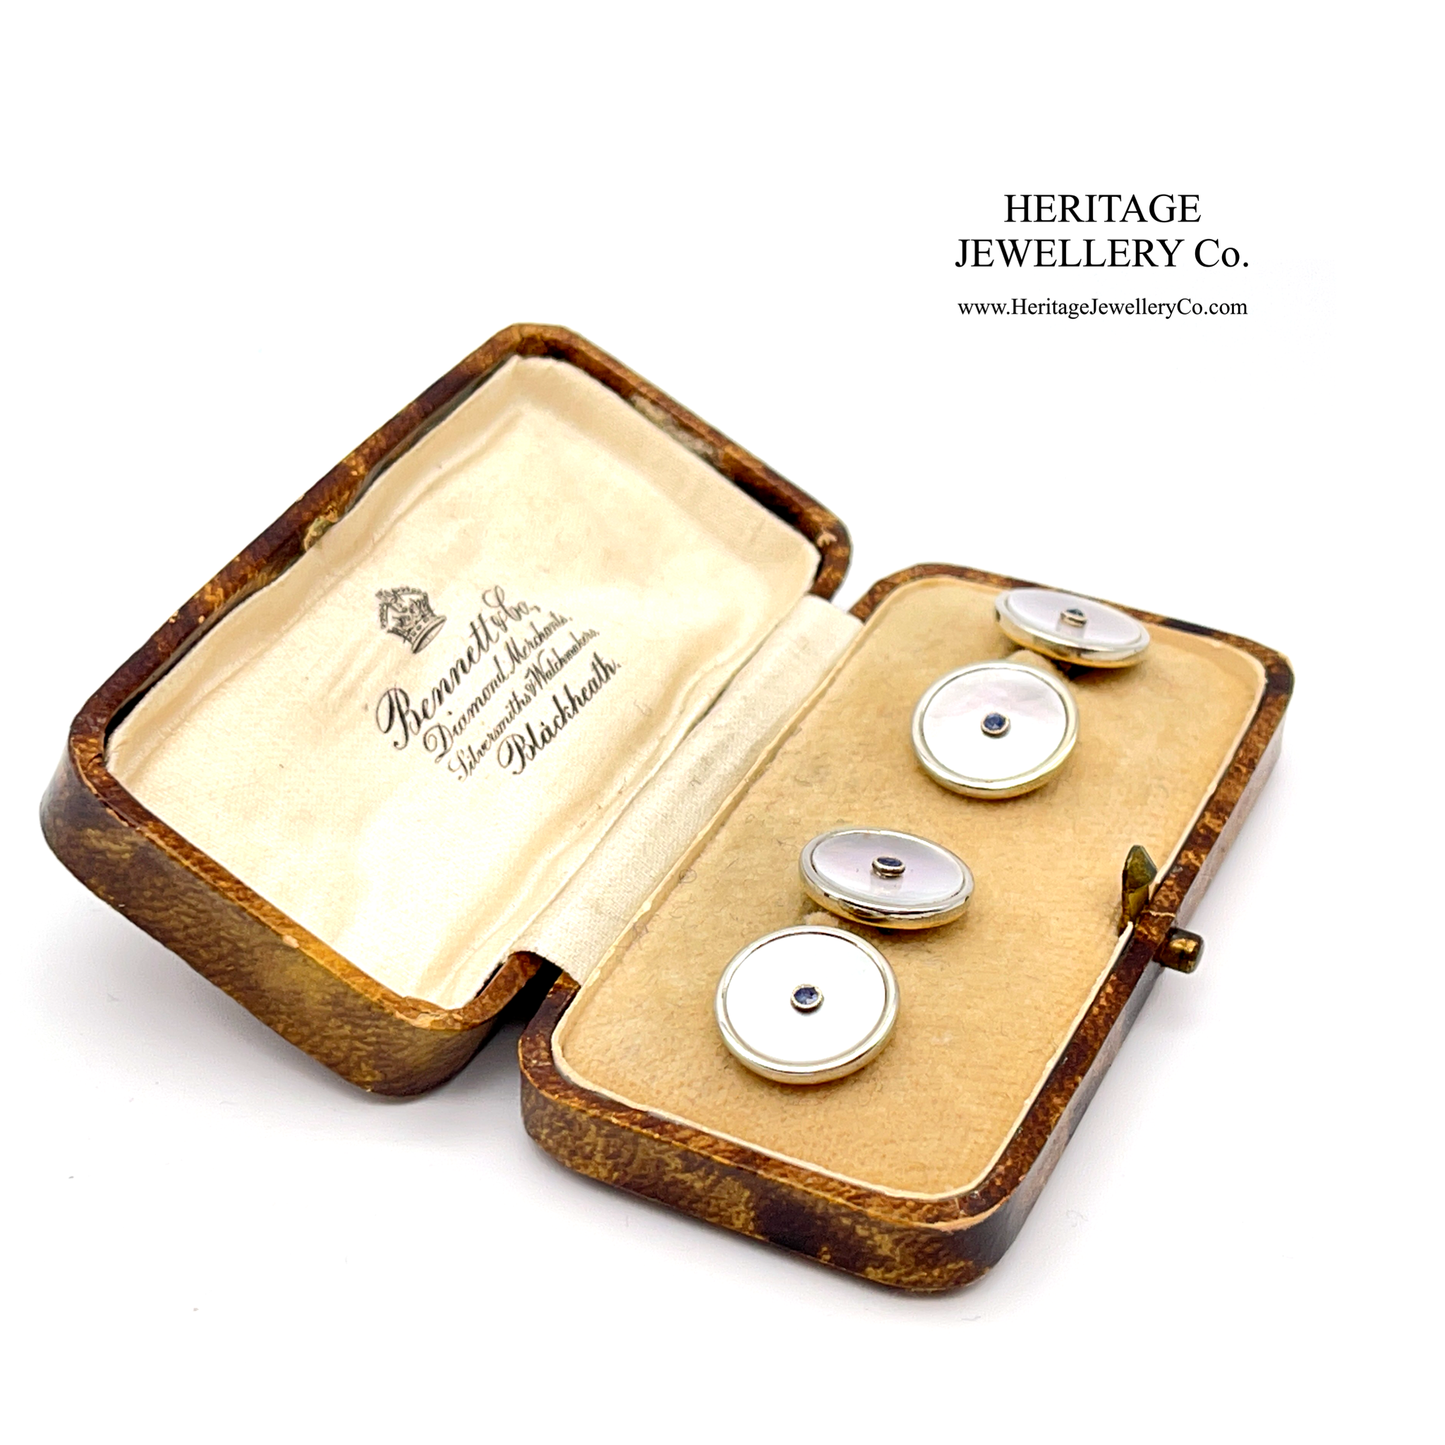 Antique Cufflinks set with Mother of Pearl and Sapphire